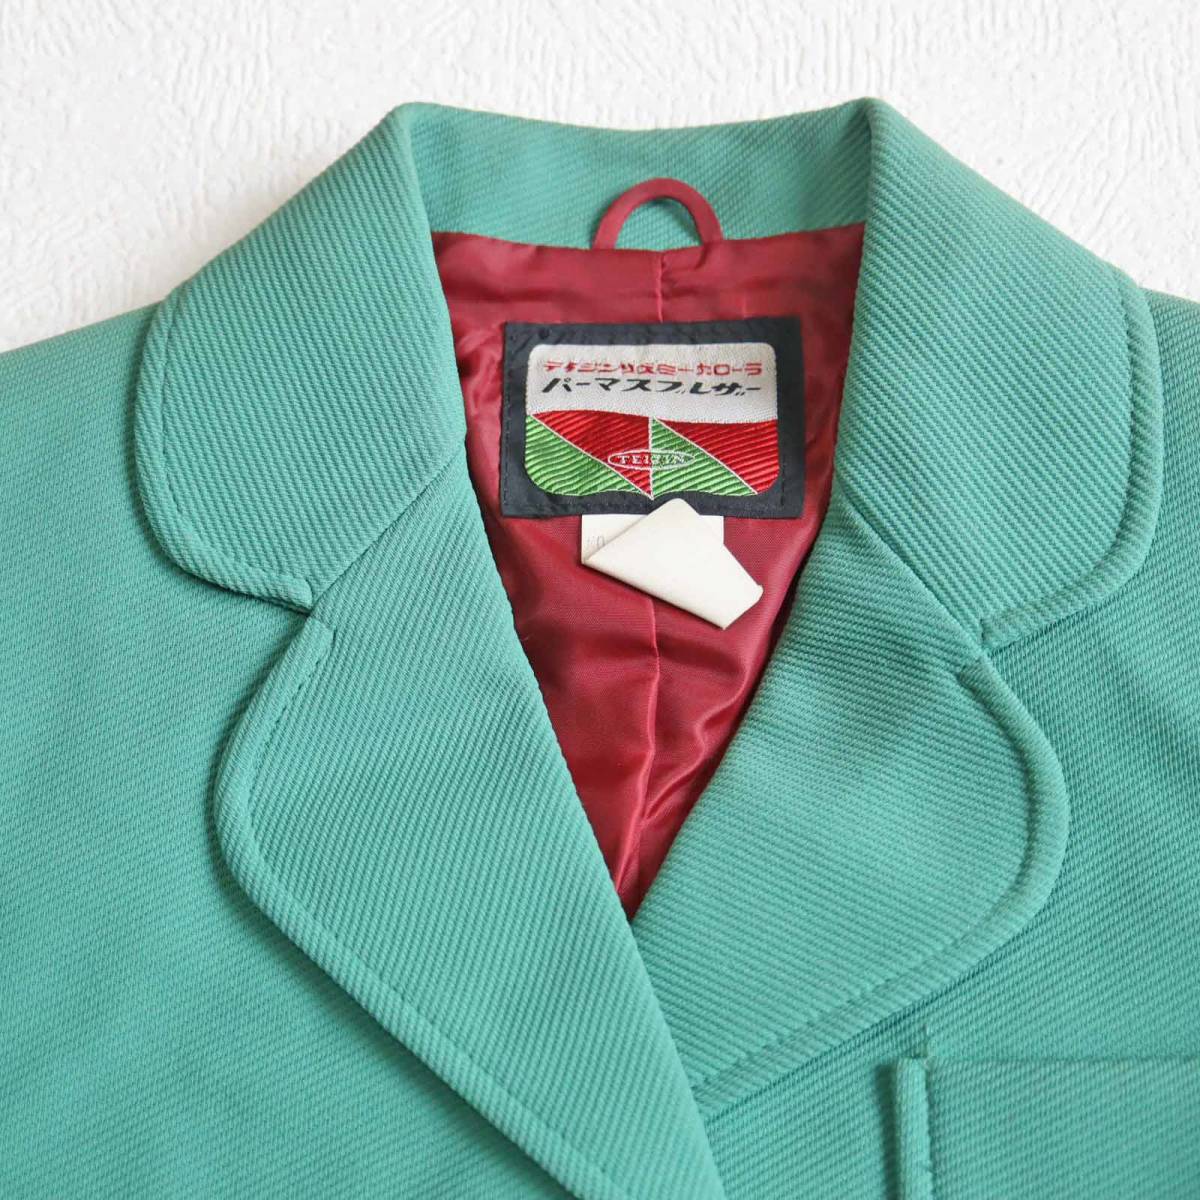 2218 Showa Retro child clothes girl jacket blaser 7-8 -years old 120. green unused long-term keeping goods price . attaching 